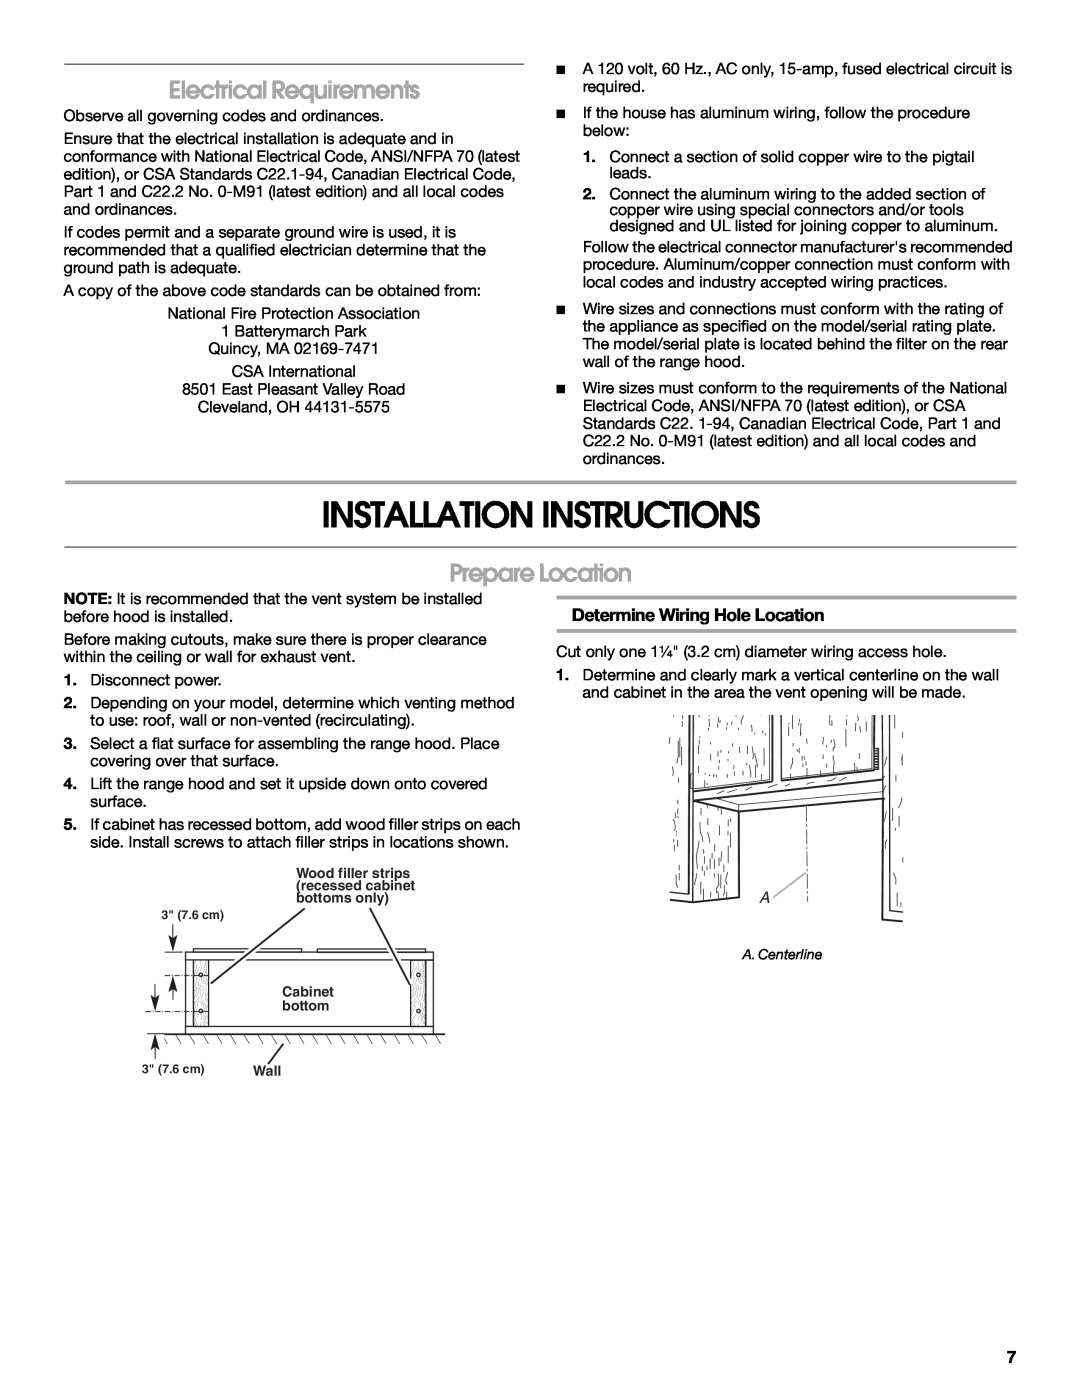 Whirlpool UXT4230AD Installation Instructions, Electrical Requirements, Prepare Location, Determine Wiring Hole Location 